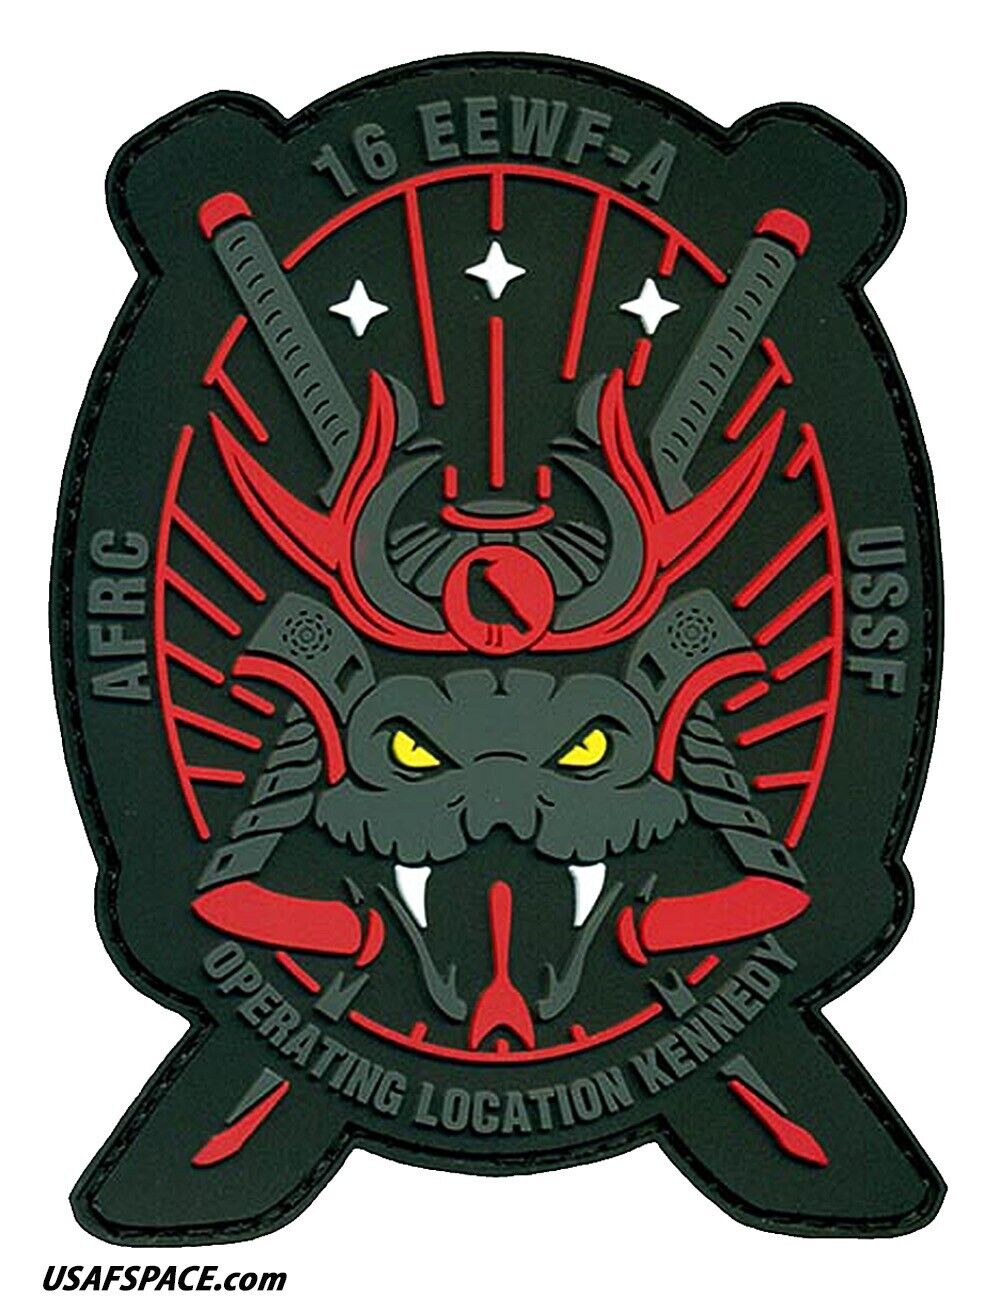 USSF 16th ELECTROMAGNETIC WARFARE SQ -16 EEWF-SPACE DELTA 3-Peterson SFB-PATCH